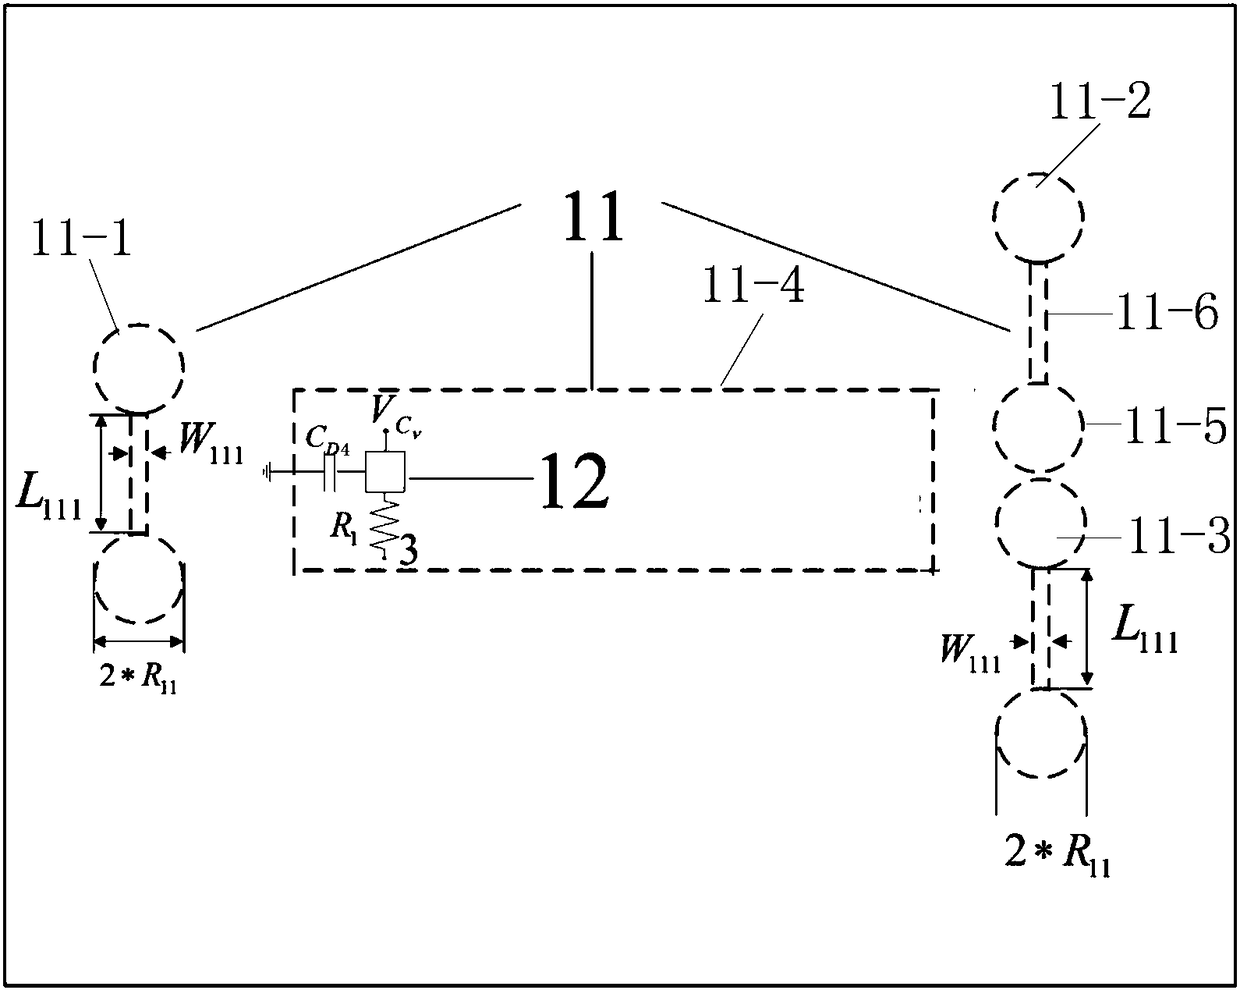 Wide-stop-band reconfigurable filter type power divider based on SIR and DGS structures